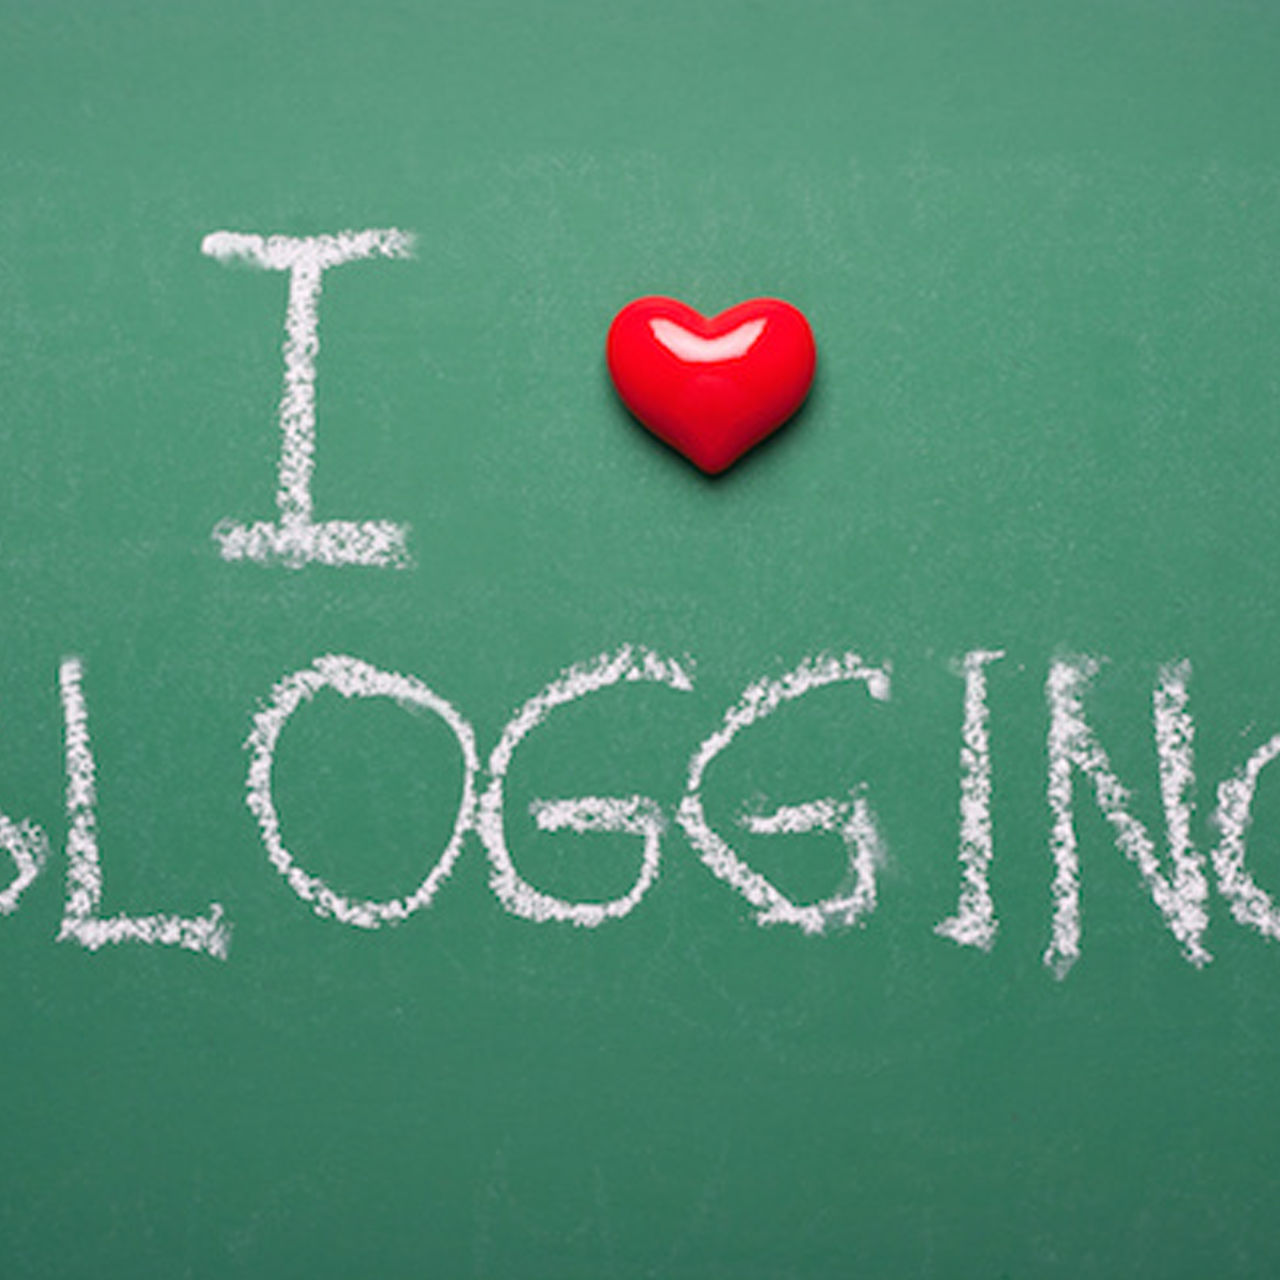 How do you stay motivated with your blogging?